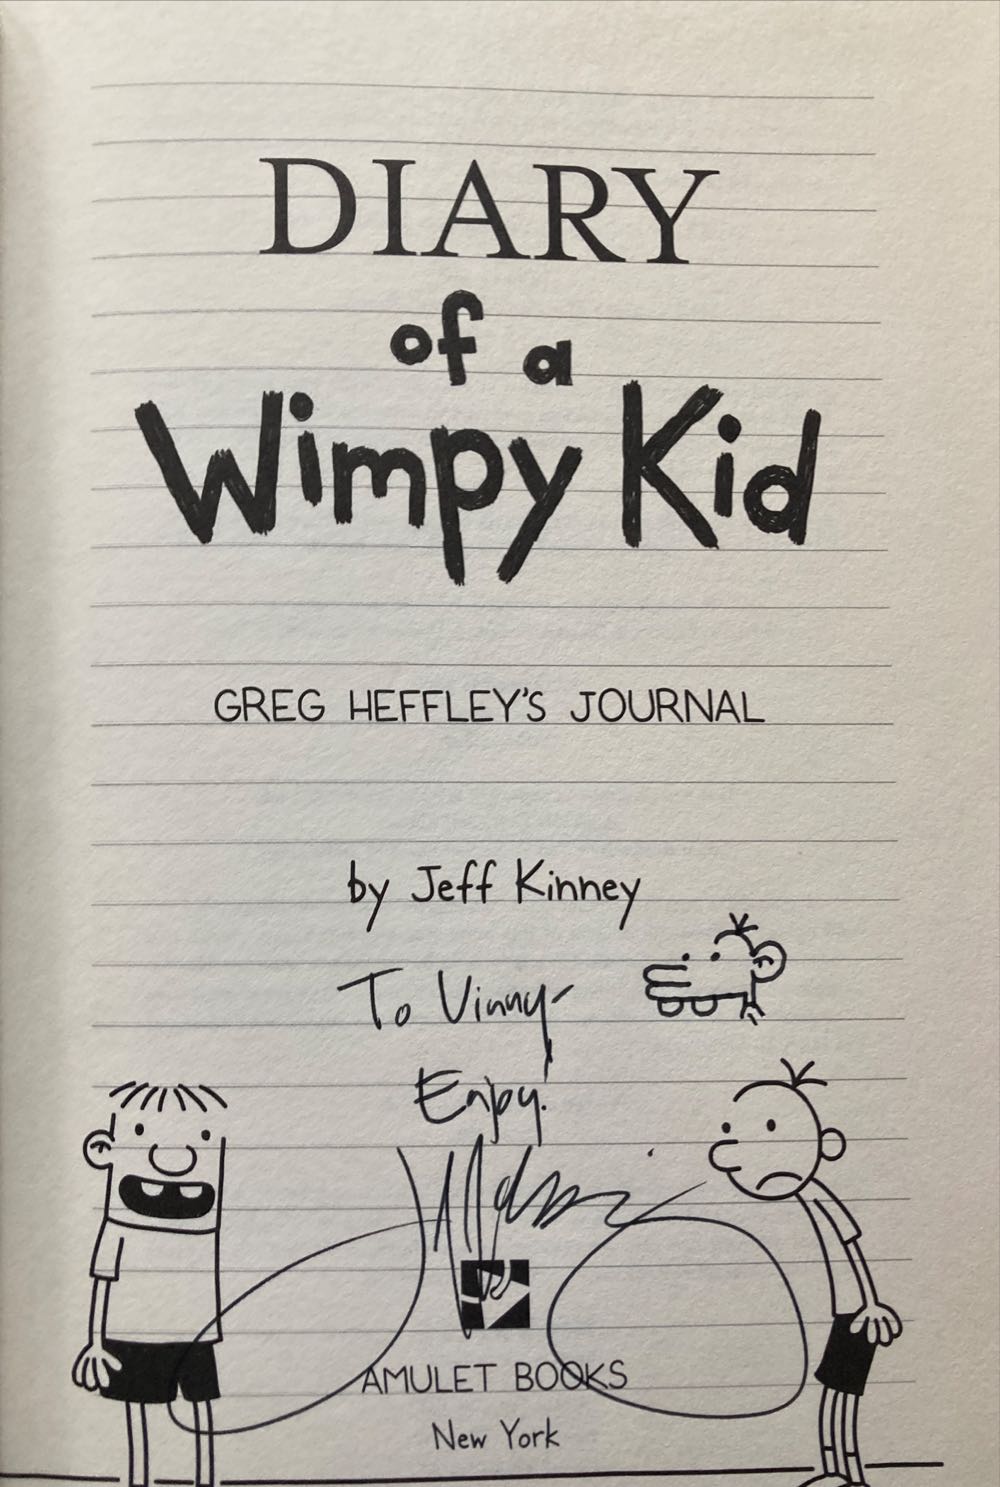 Diary of a Wimpy Kid (Diary of a Wimpy Kid, Book 1) - Jeff Kinney (Amulet Books - Hardcover) book collectible [Barcode 9780810993136] - Main Image 3